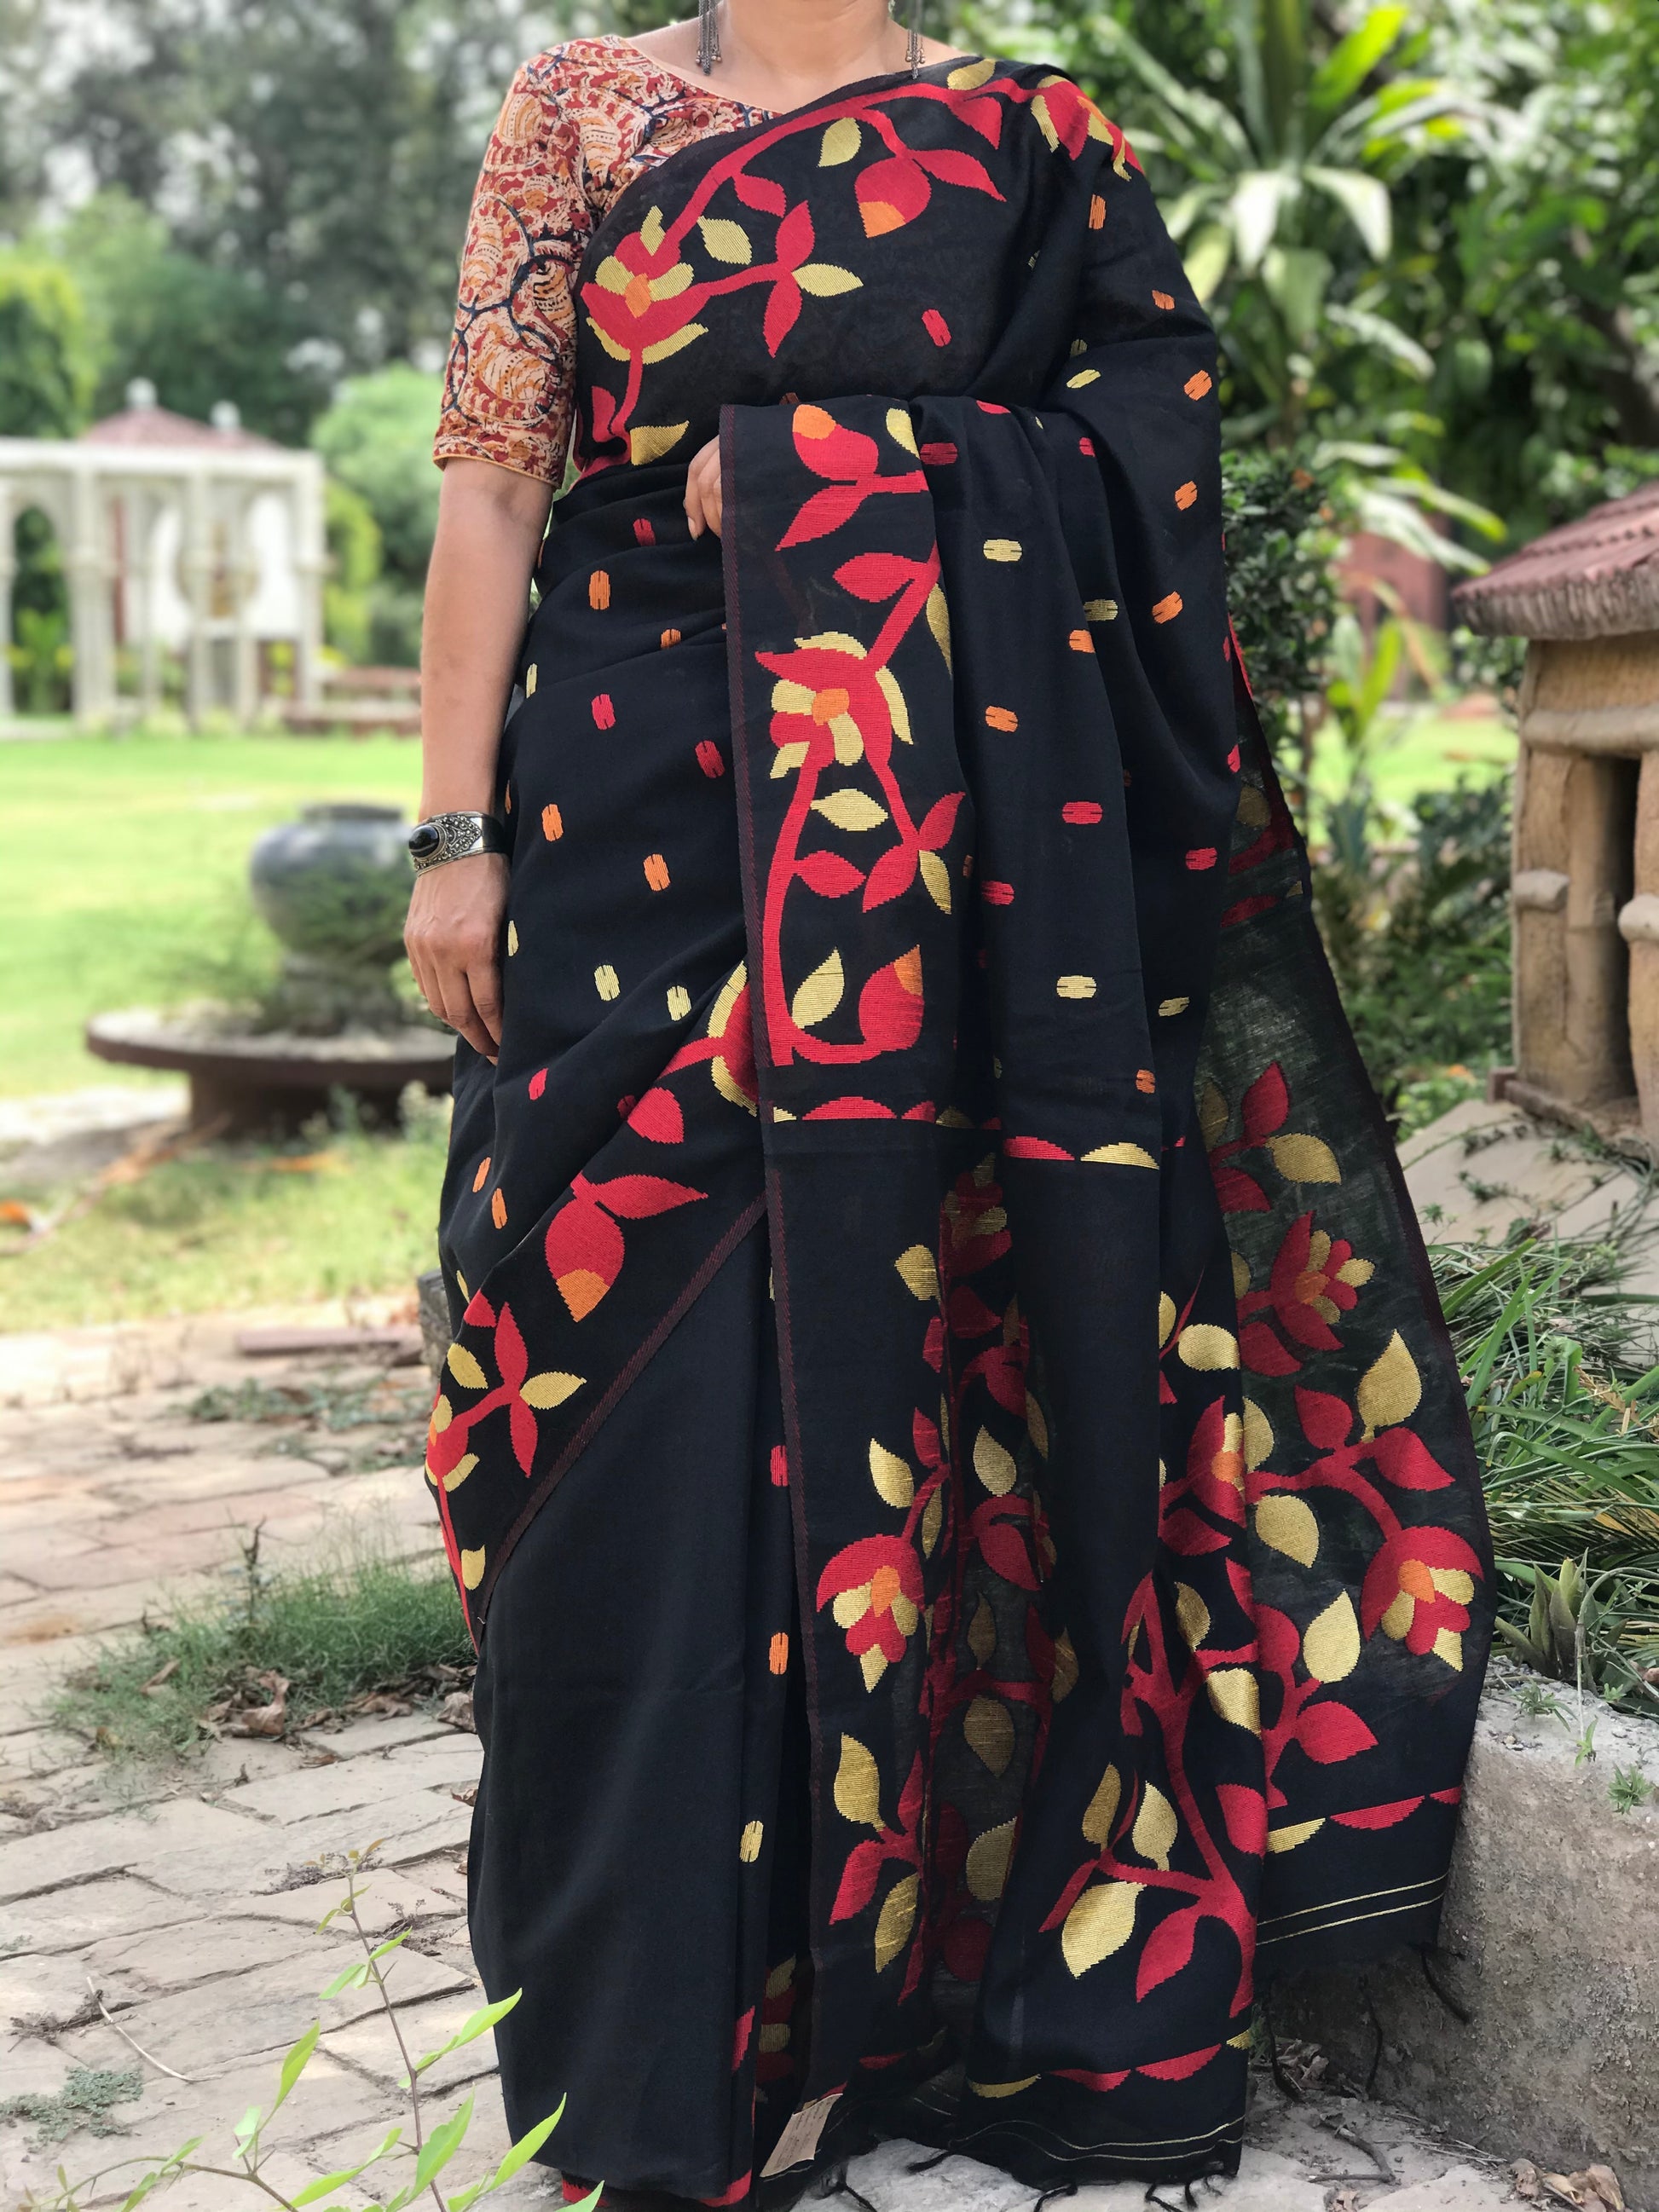 Image of Elegant and Traditional Bengal Cotton Printed Saree  The Source India is an Indian Handicraft, Home Decor, Furnishing and Textiles Store. Based out of Hauz Khas Village New Delhi, each piece is carefully procured to allow the enhancement of India's Culture. 